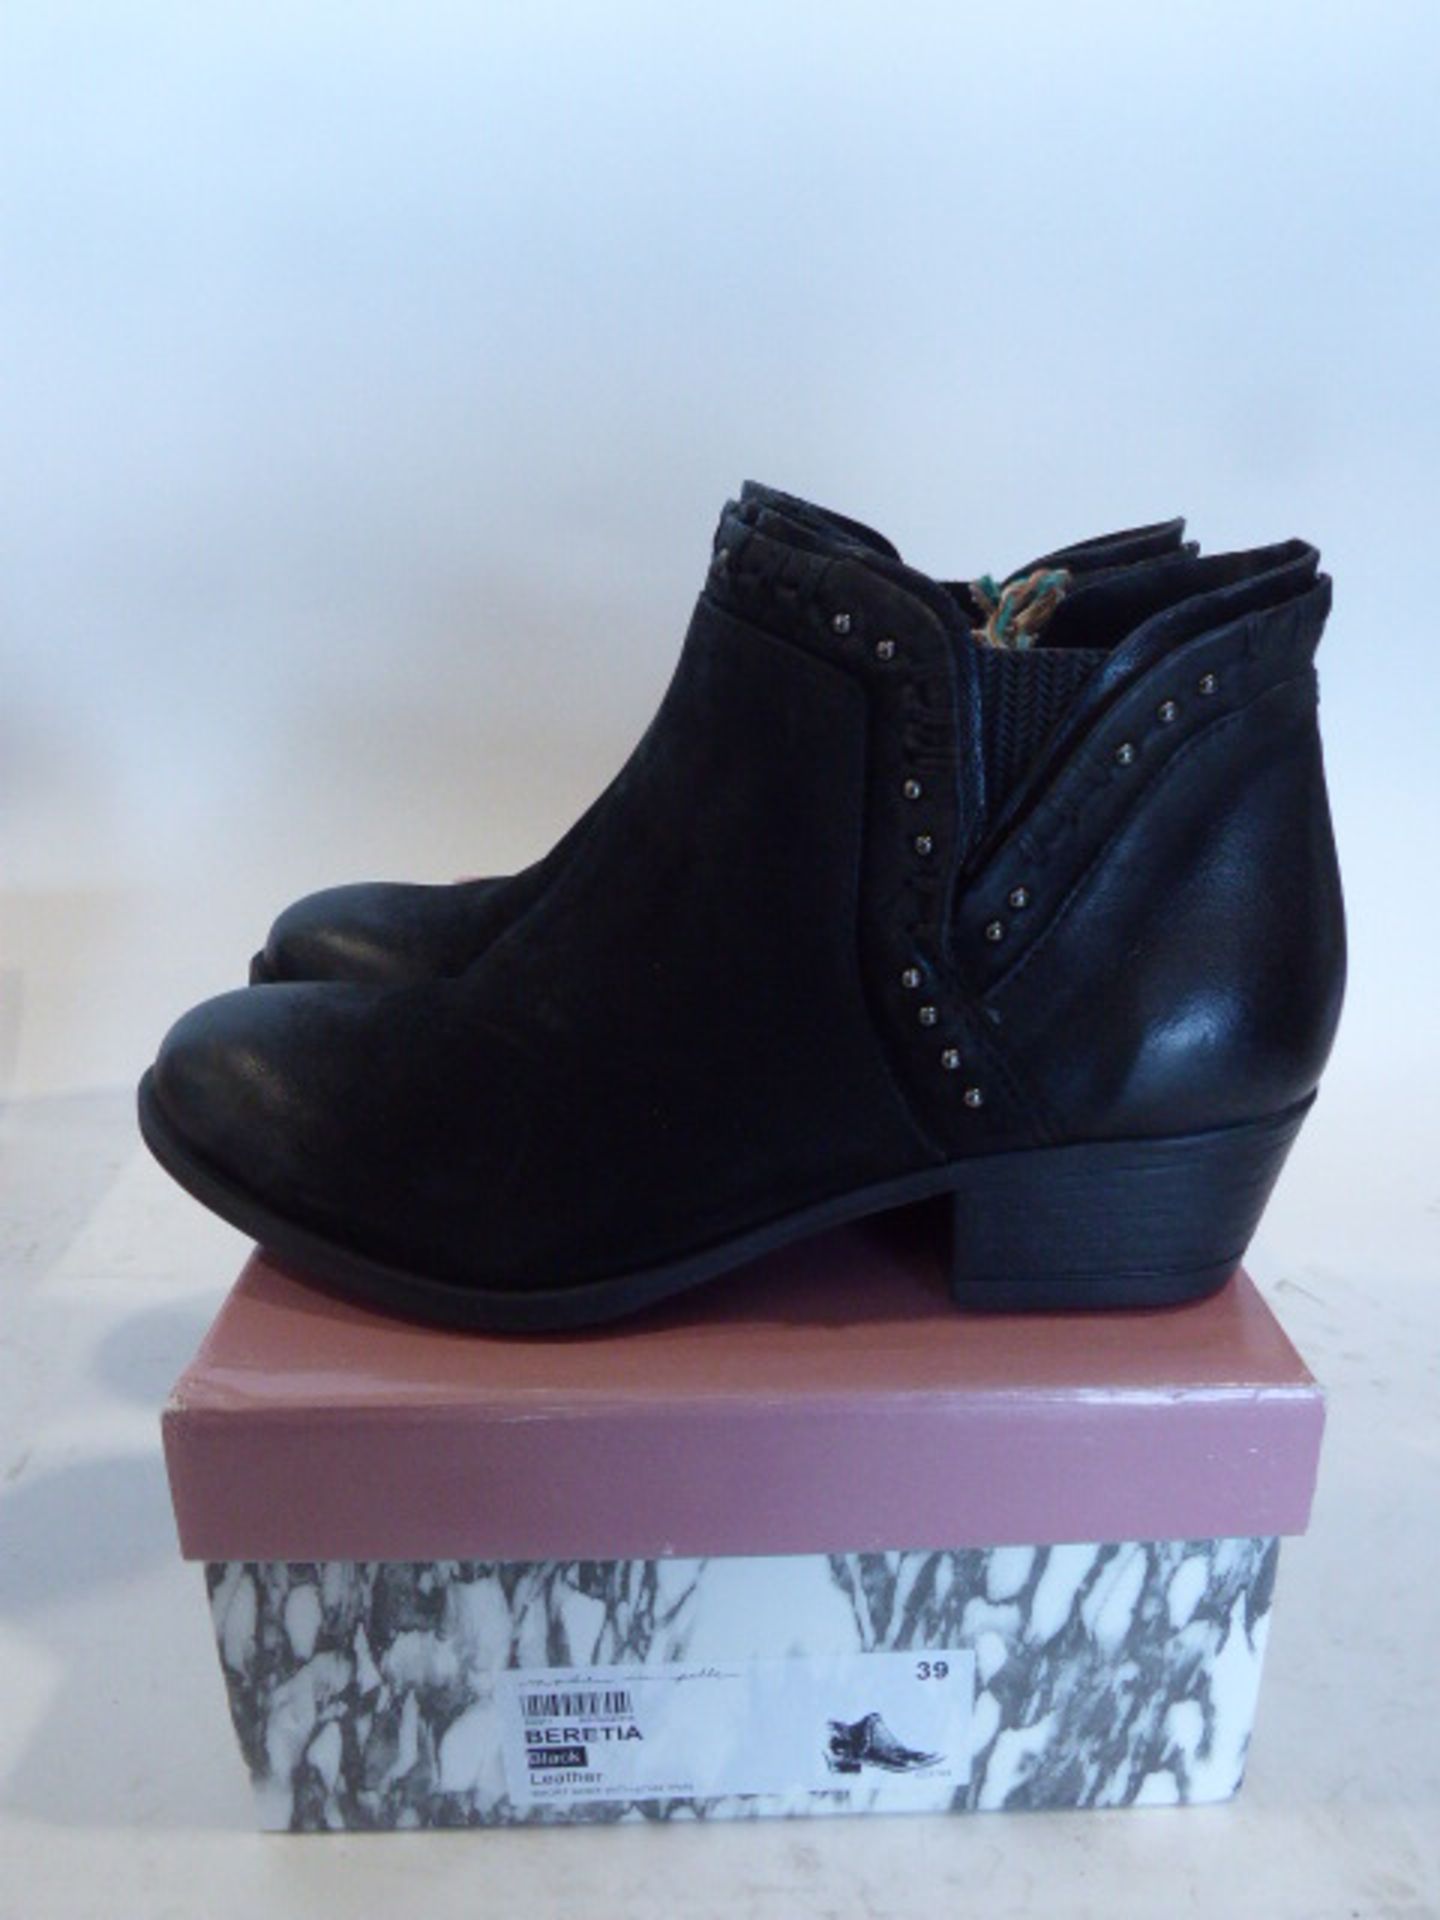 2 pairs of Moda in Pelle Beretia boots sizes EU 38 and 39 - Image 3 of 5